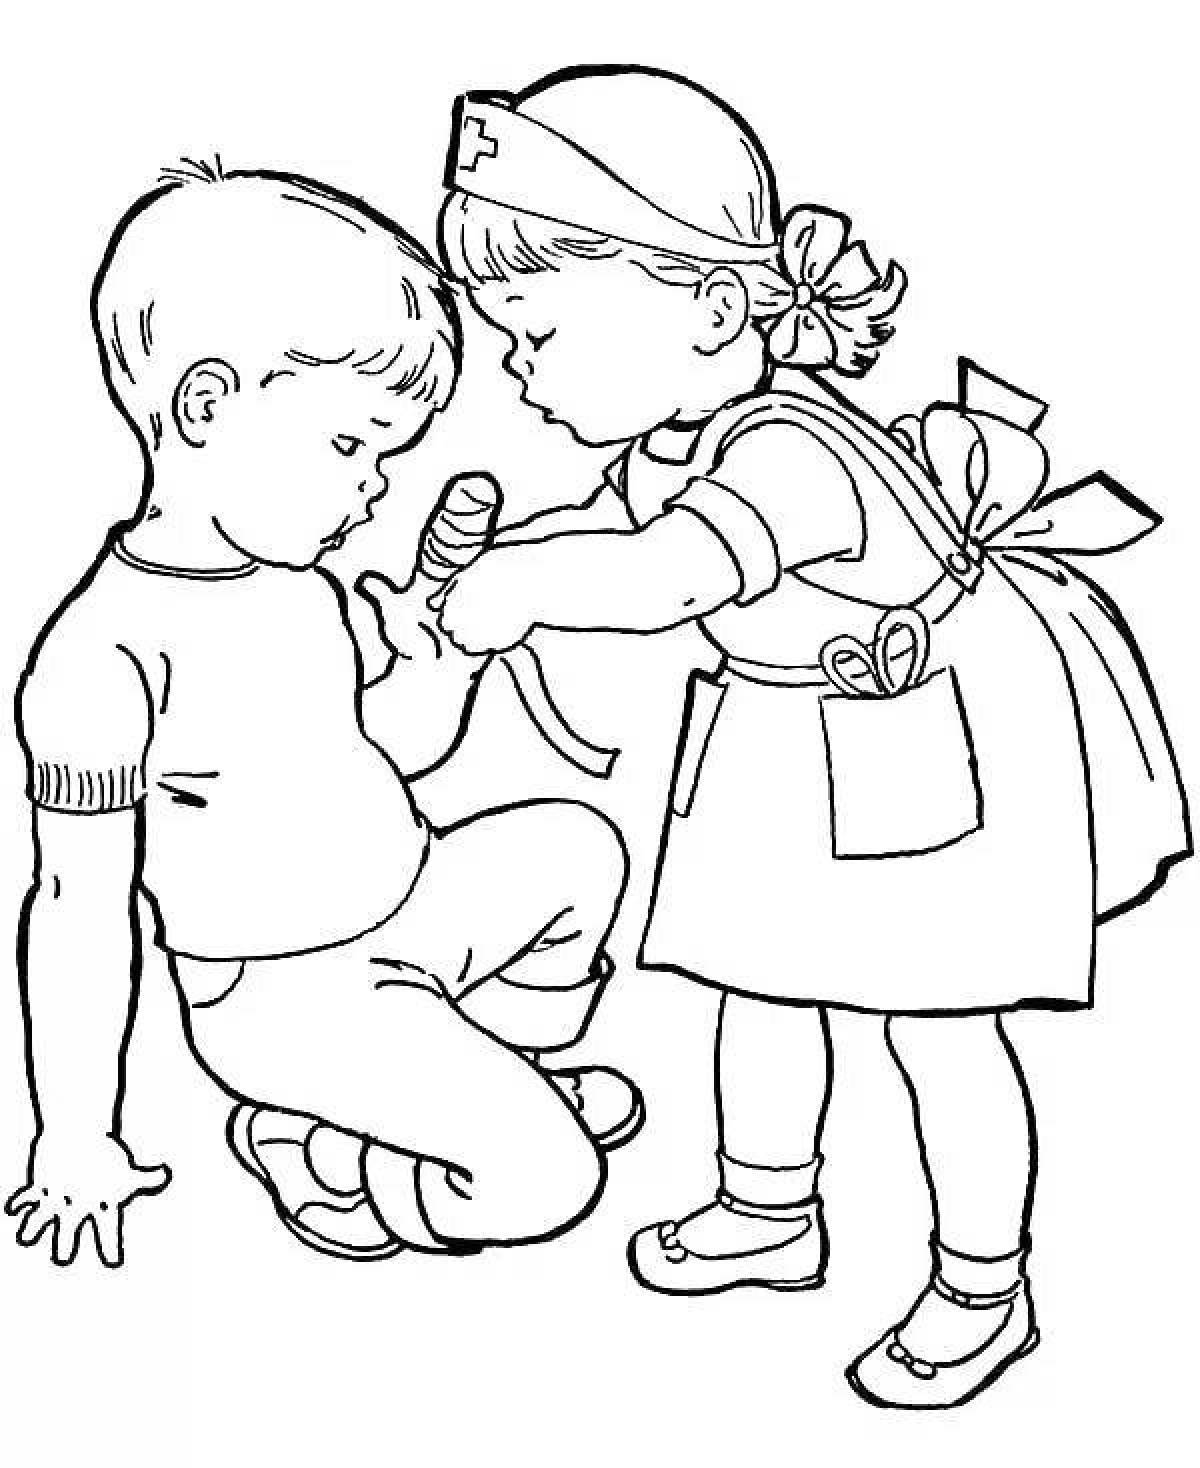 Coloring pages joyful things for kids